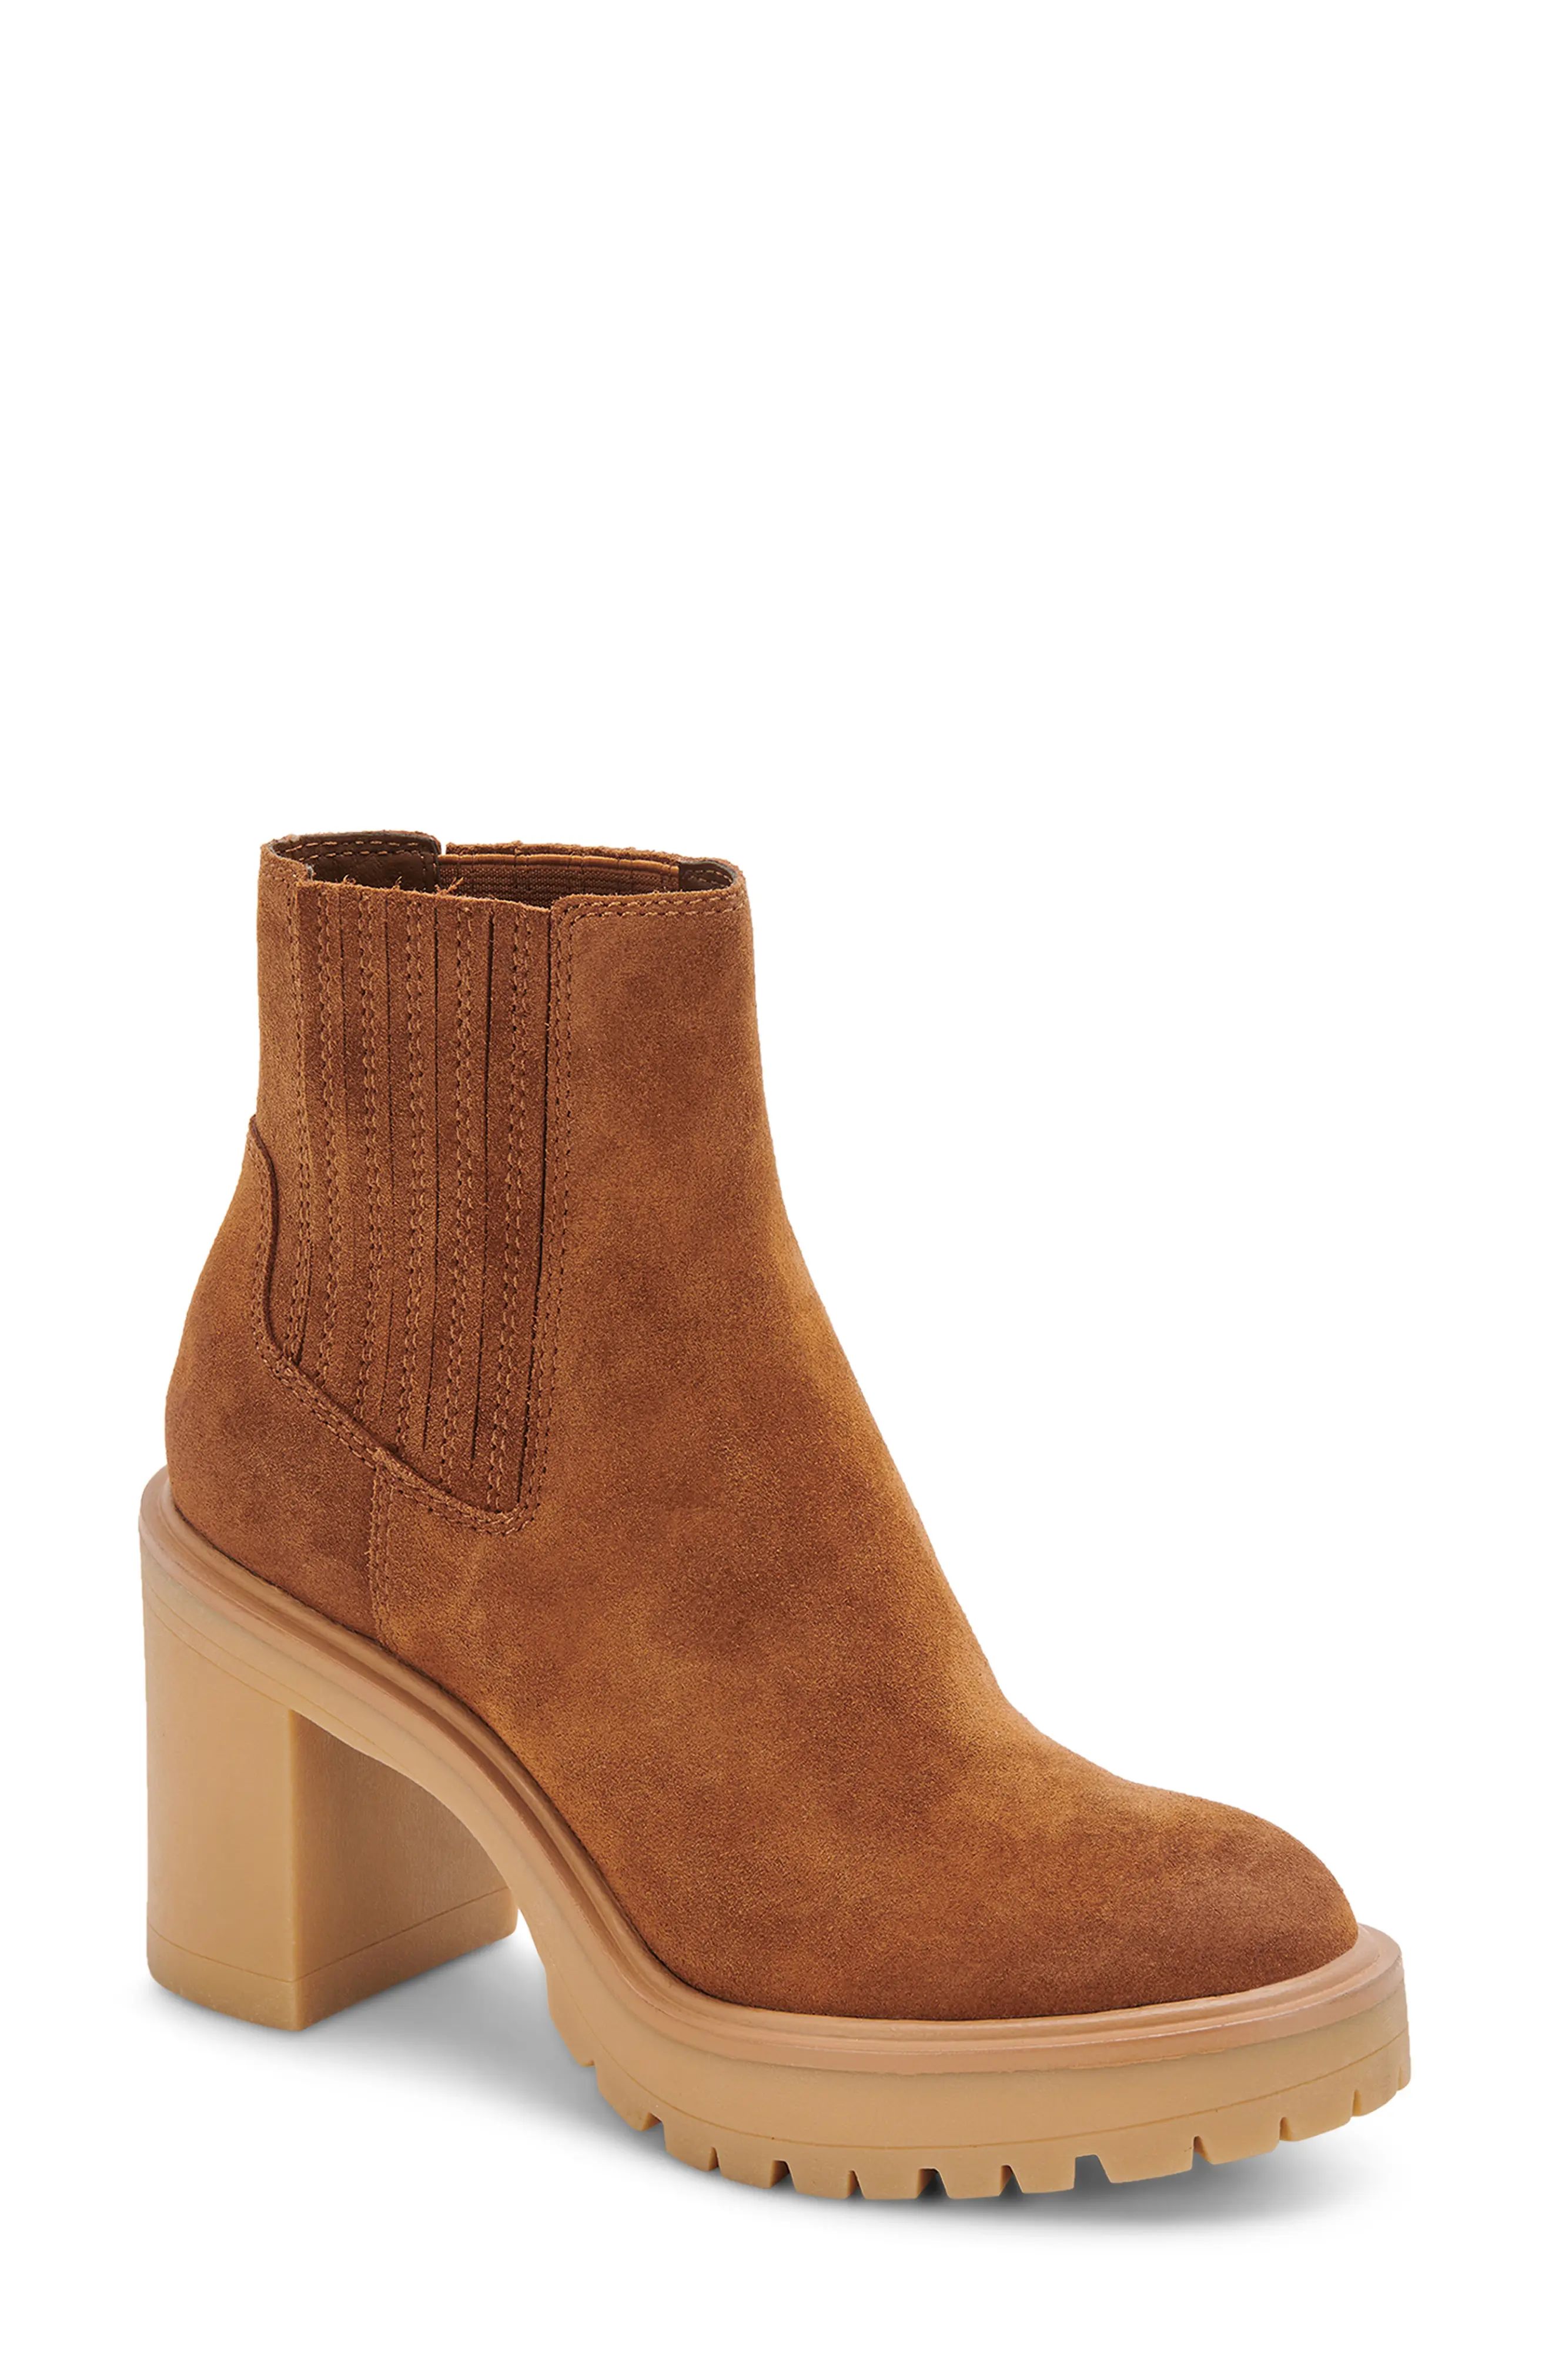 Dolce Vita Caster H2O Waterproof Block Heel Bootie, Size 6.5 in Camel Suede H2O at Nordstrom | Nordstrom